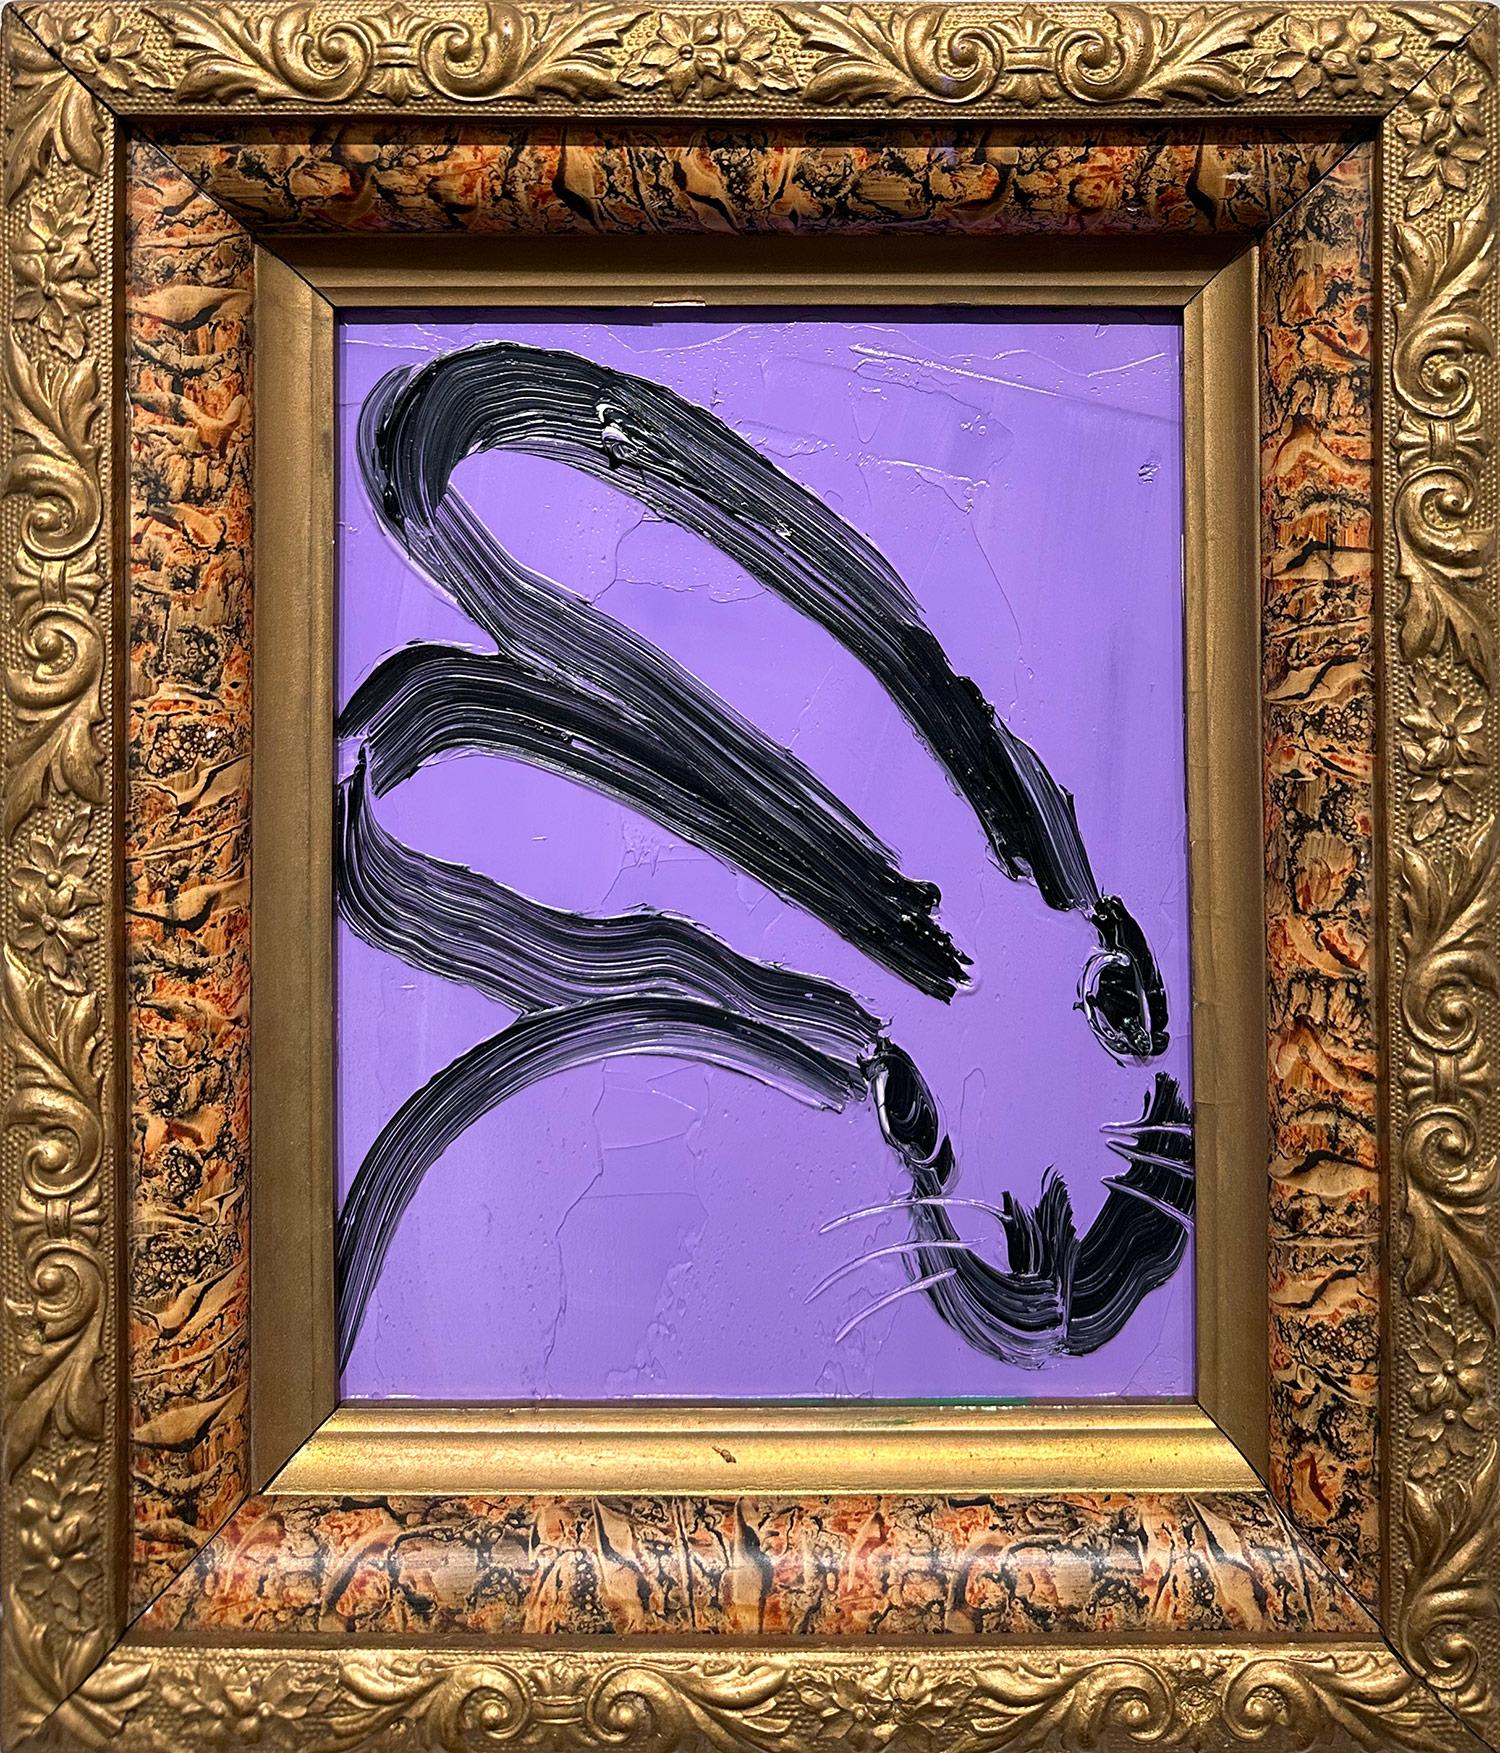 "Sonia" Black Bunny on Purple Background Oil Painting on Wood Panel Framed